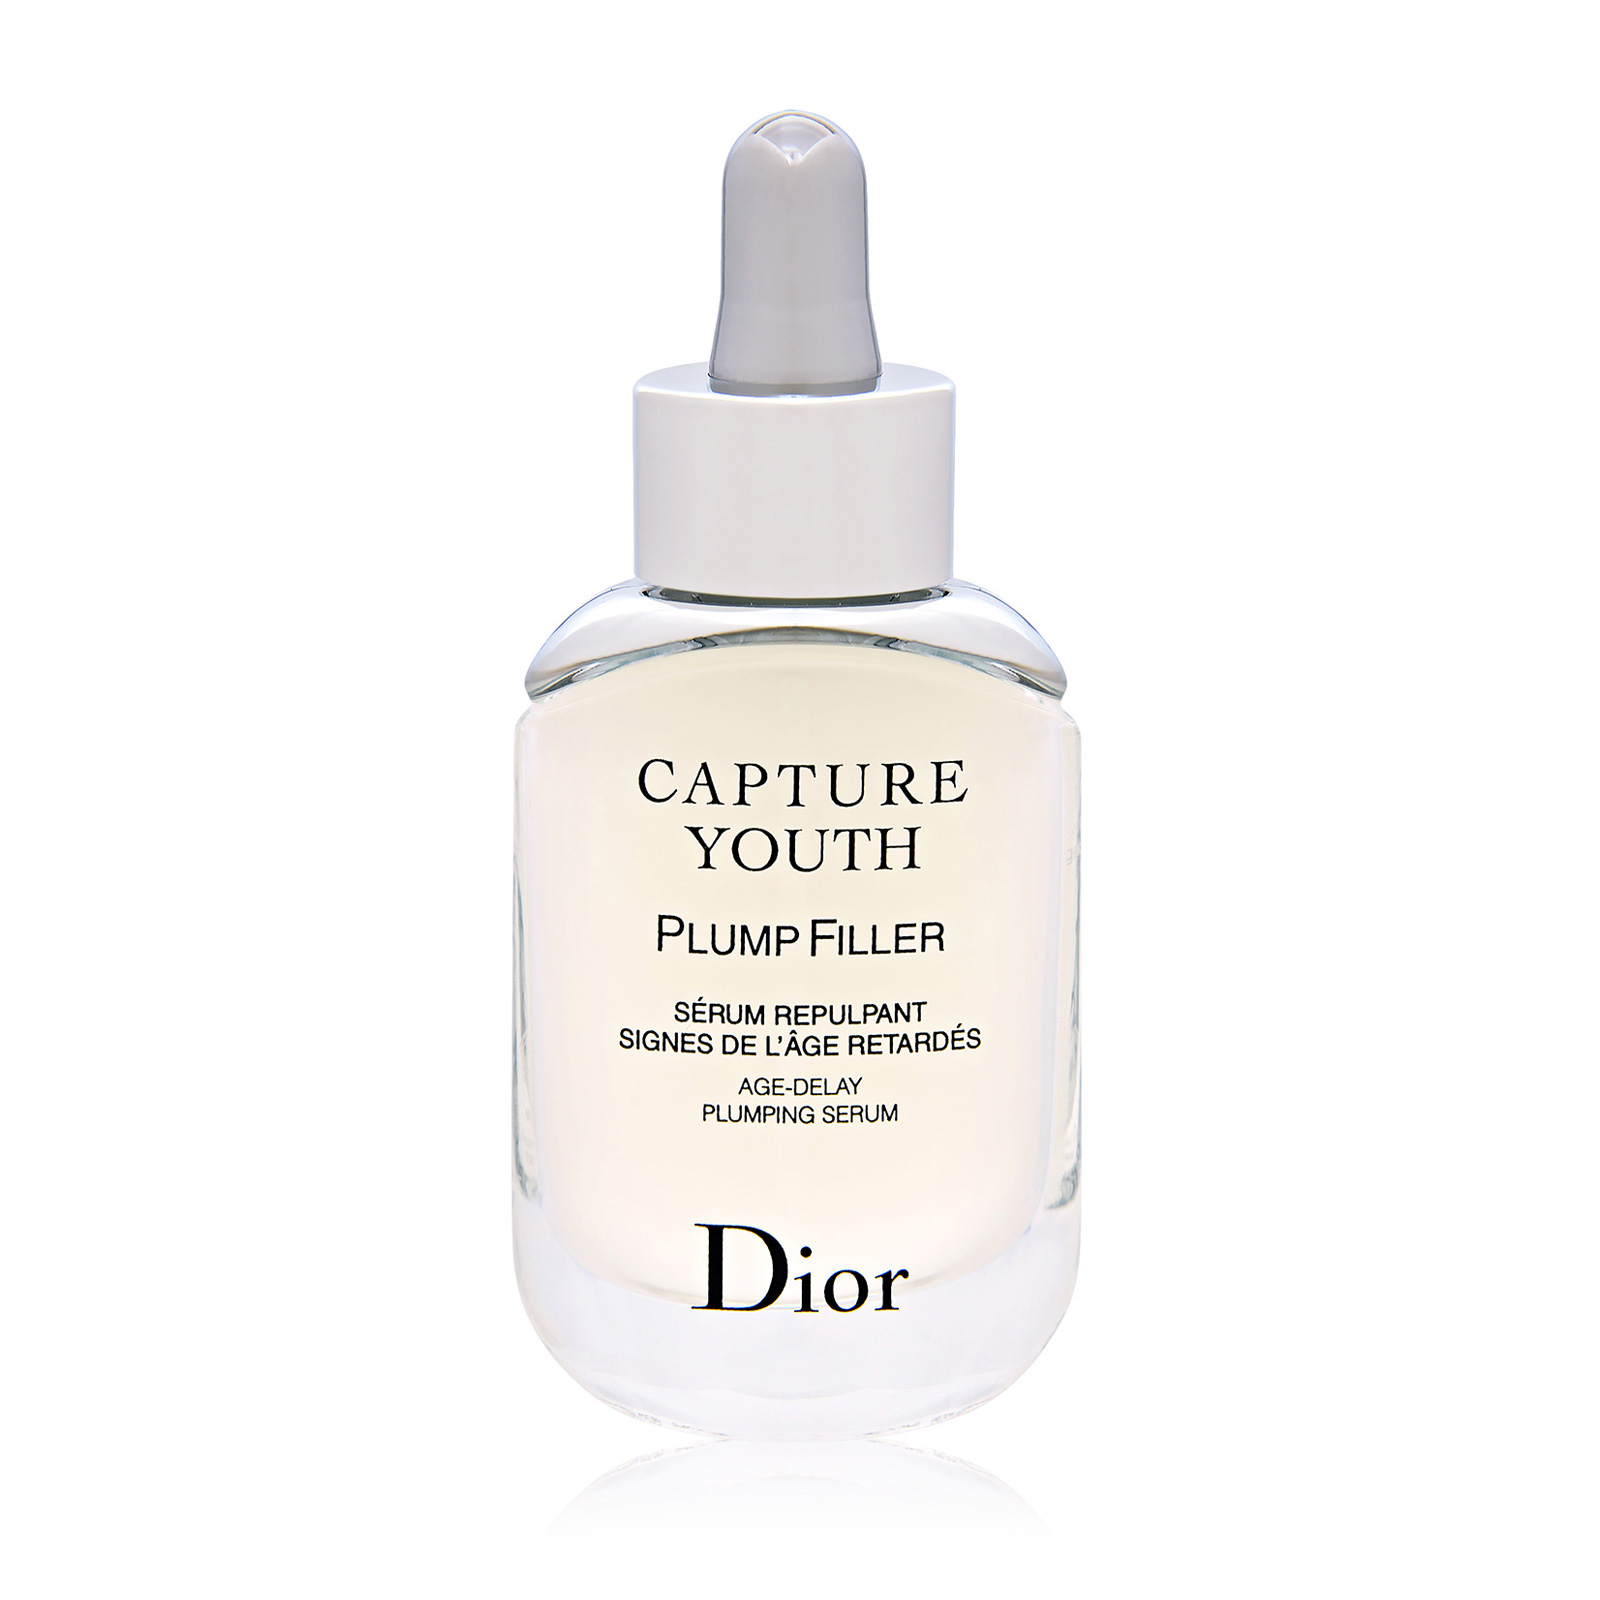 Capture Youth Plump Filler Age-Delay Plumping Serum